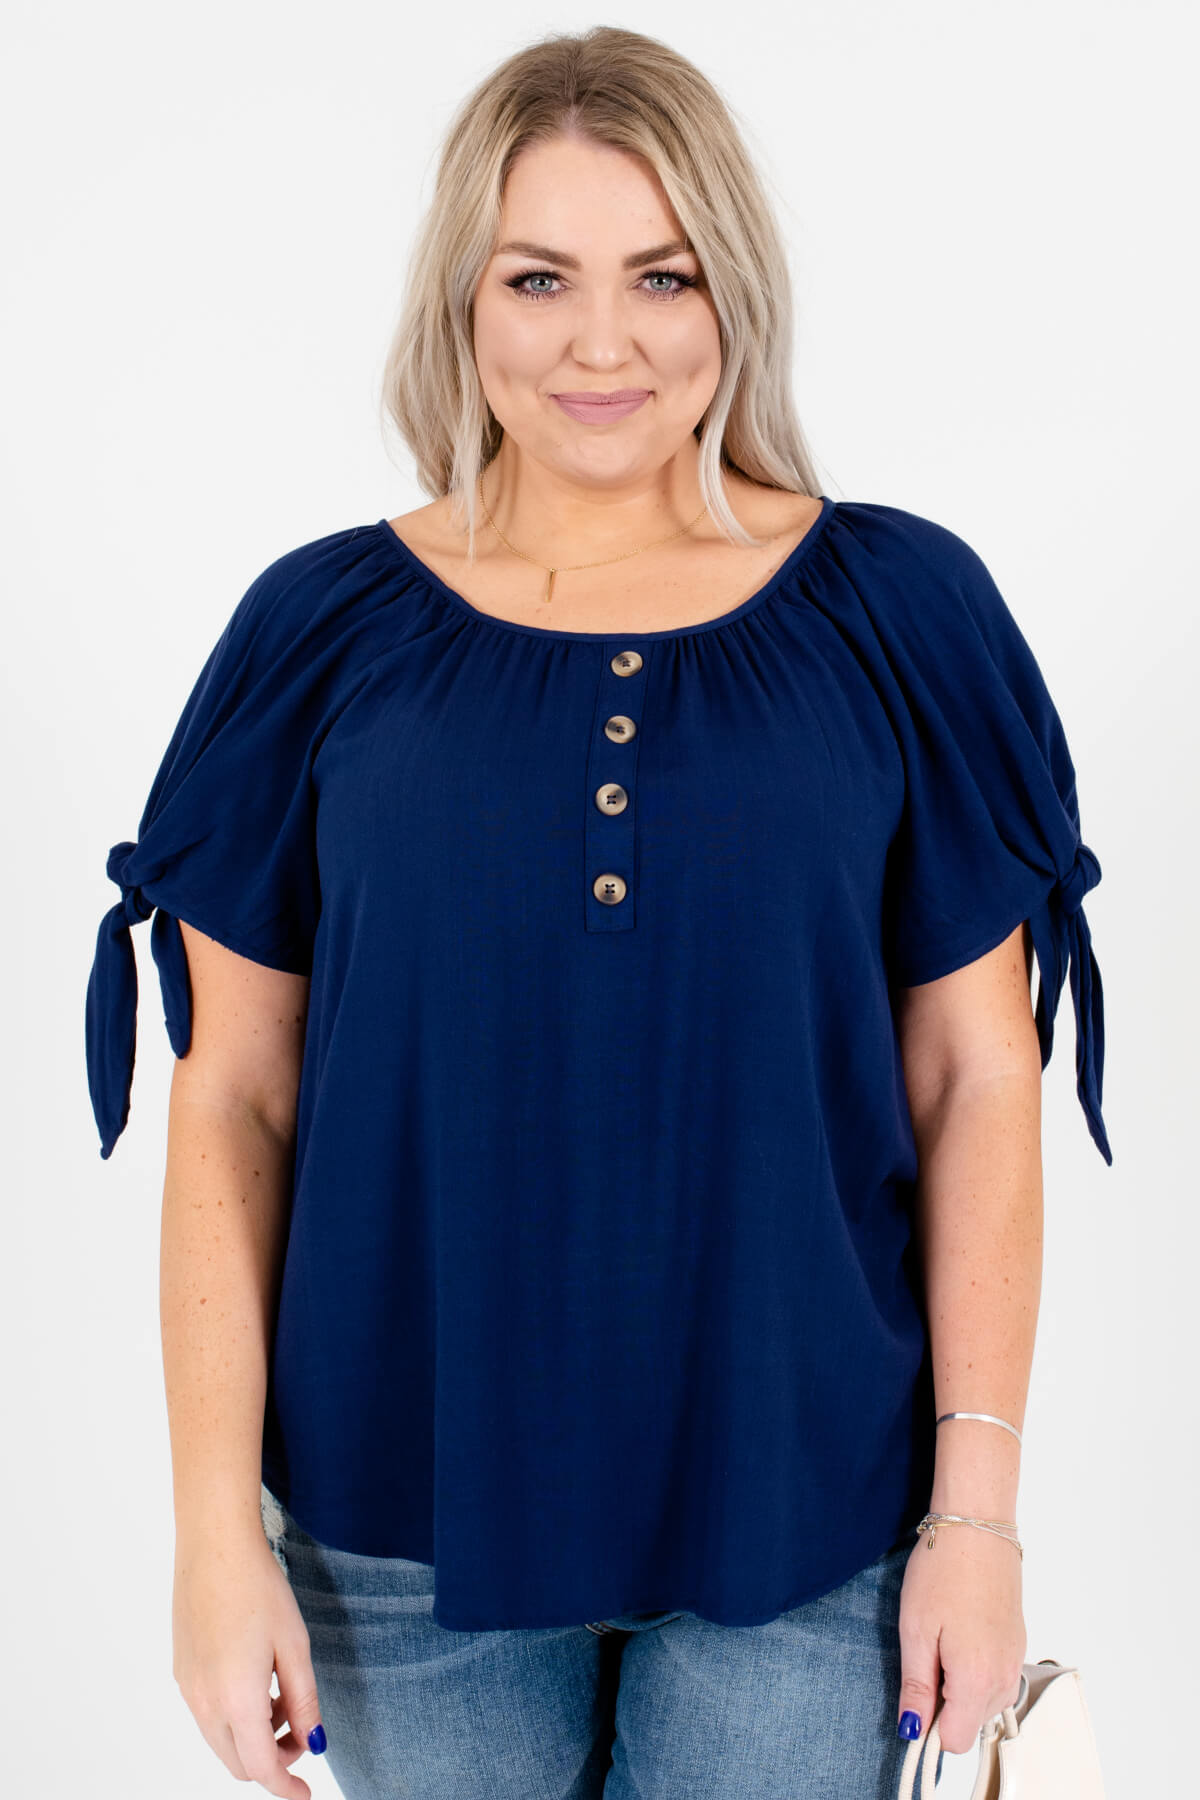 Navy Blue Cute and Comfortable Boutique Plus Size Tops for Women